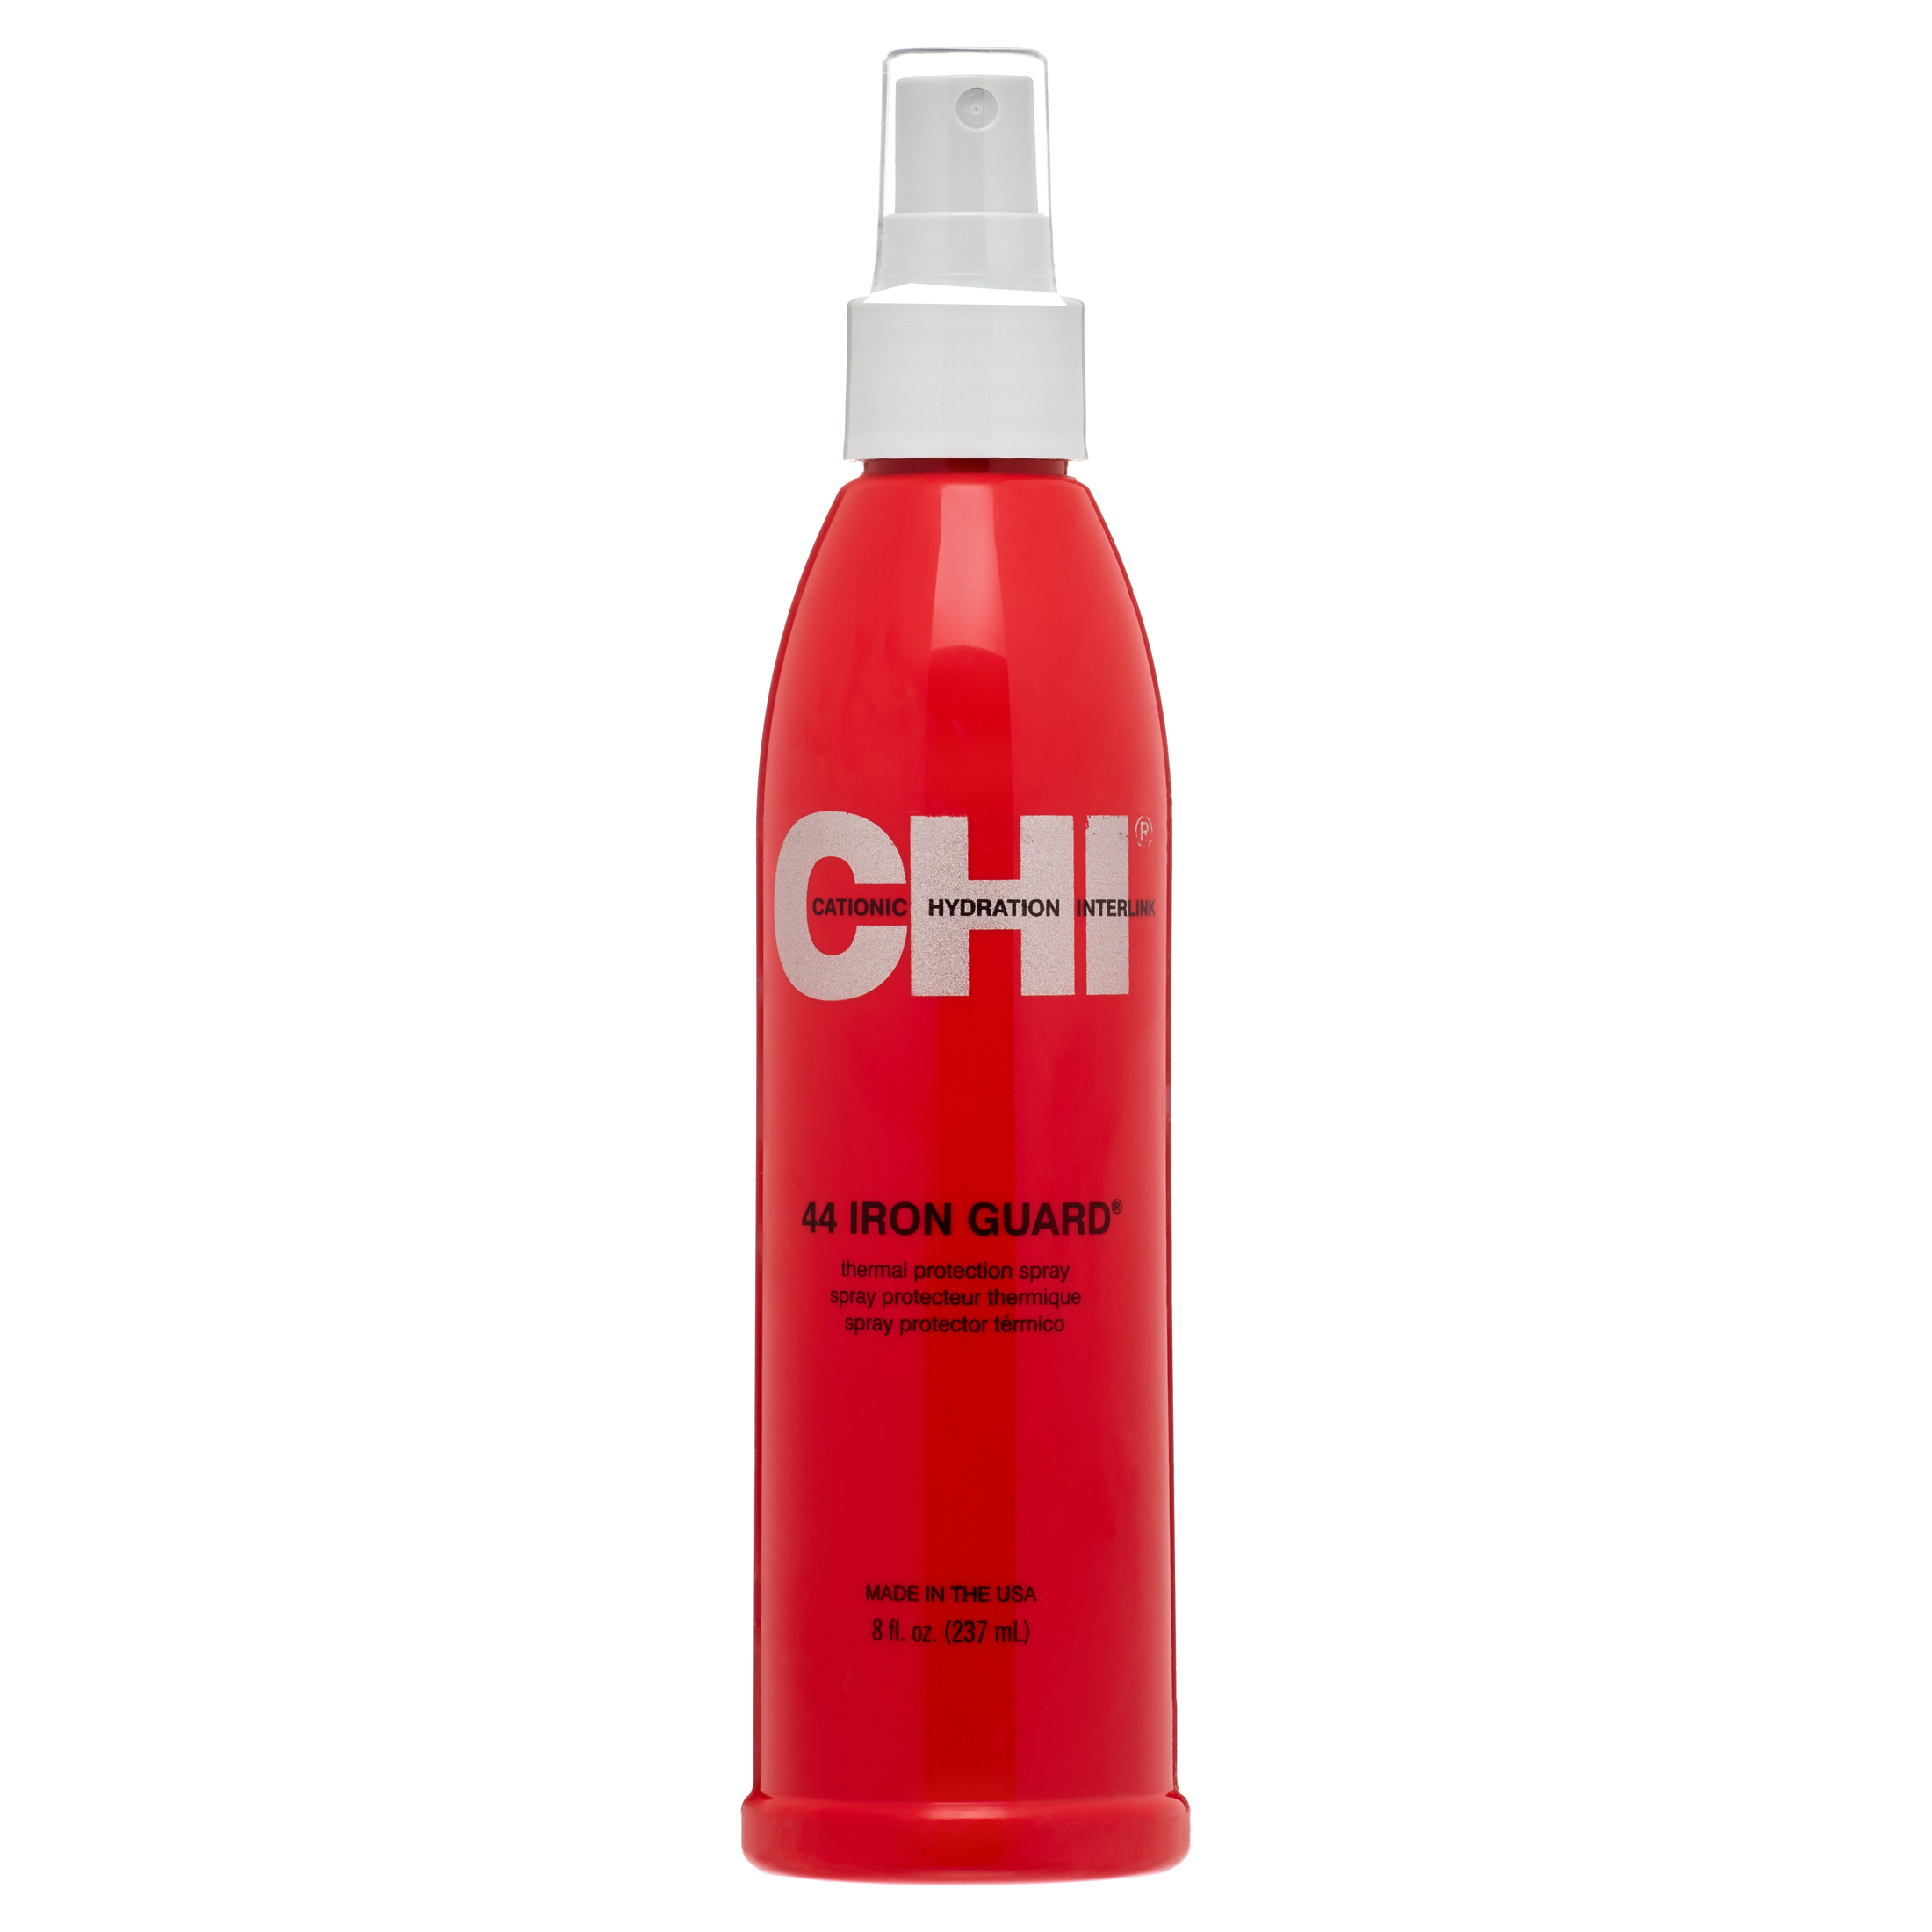 CHI 44 Iron Guard Thermal Protection Spray 8 oz - image 4 of 8